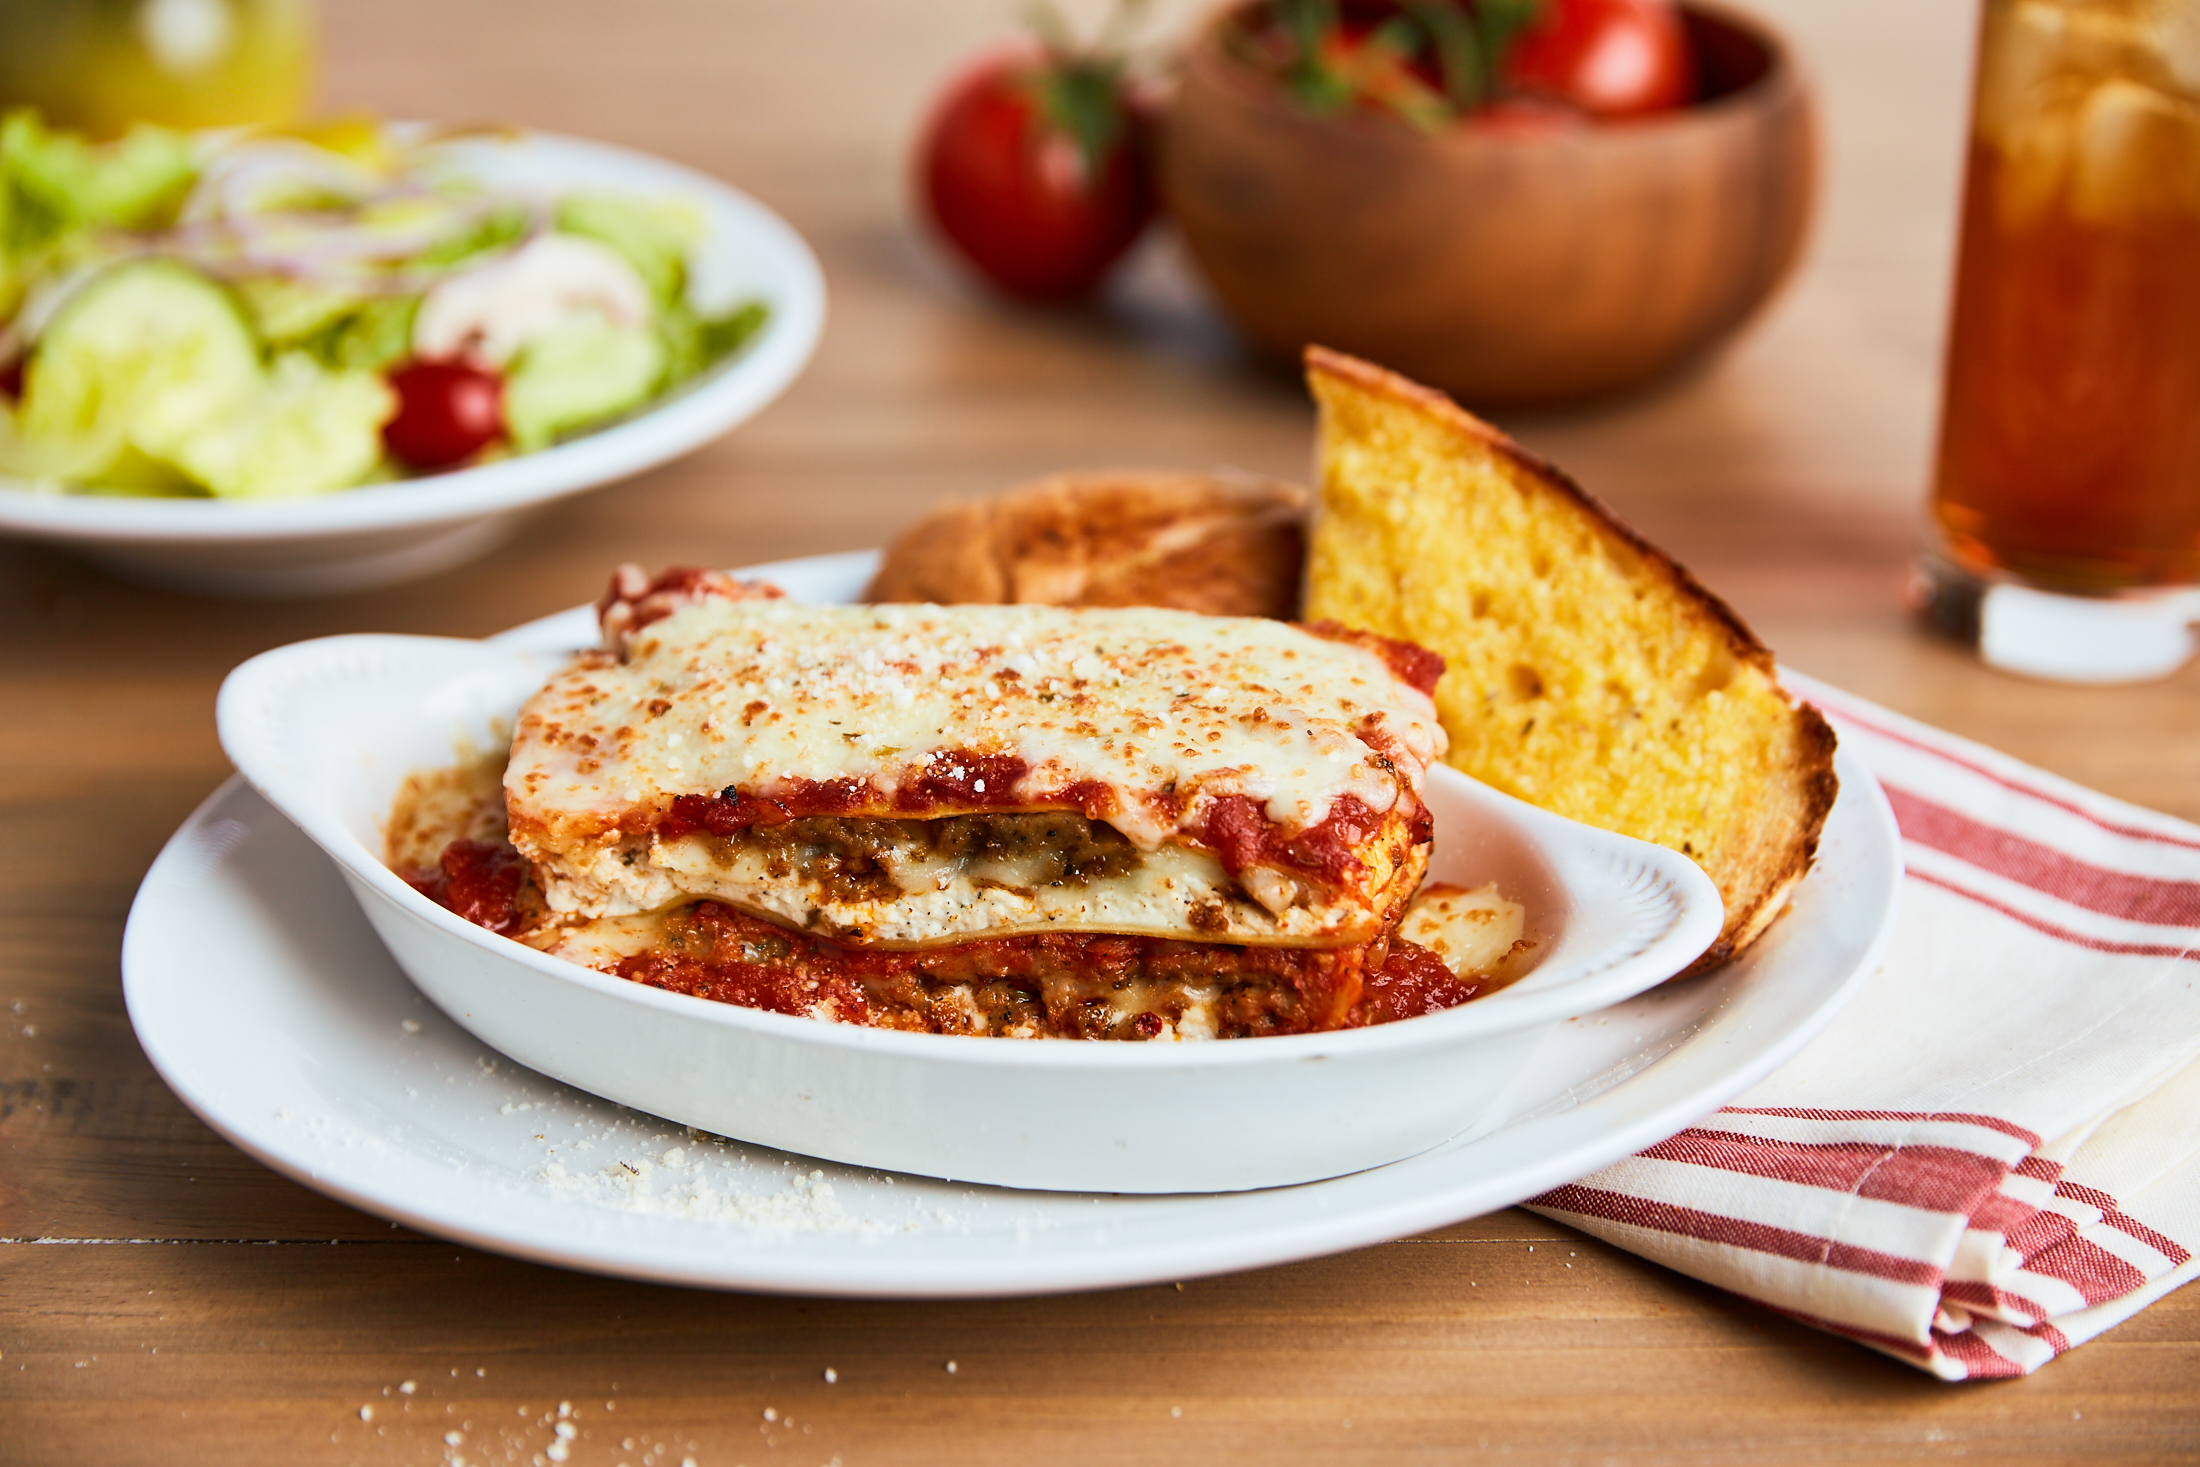 LASAGNA - Always a classic! Layers of seasoned ricotta, mozzarella, sliced meatballs & crumbled sausage baked in our marinara sauce.